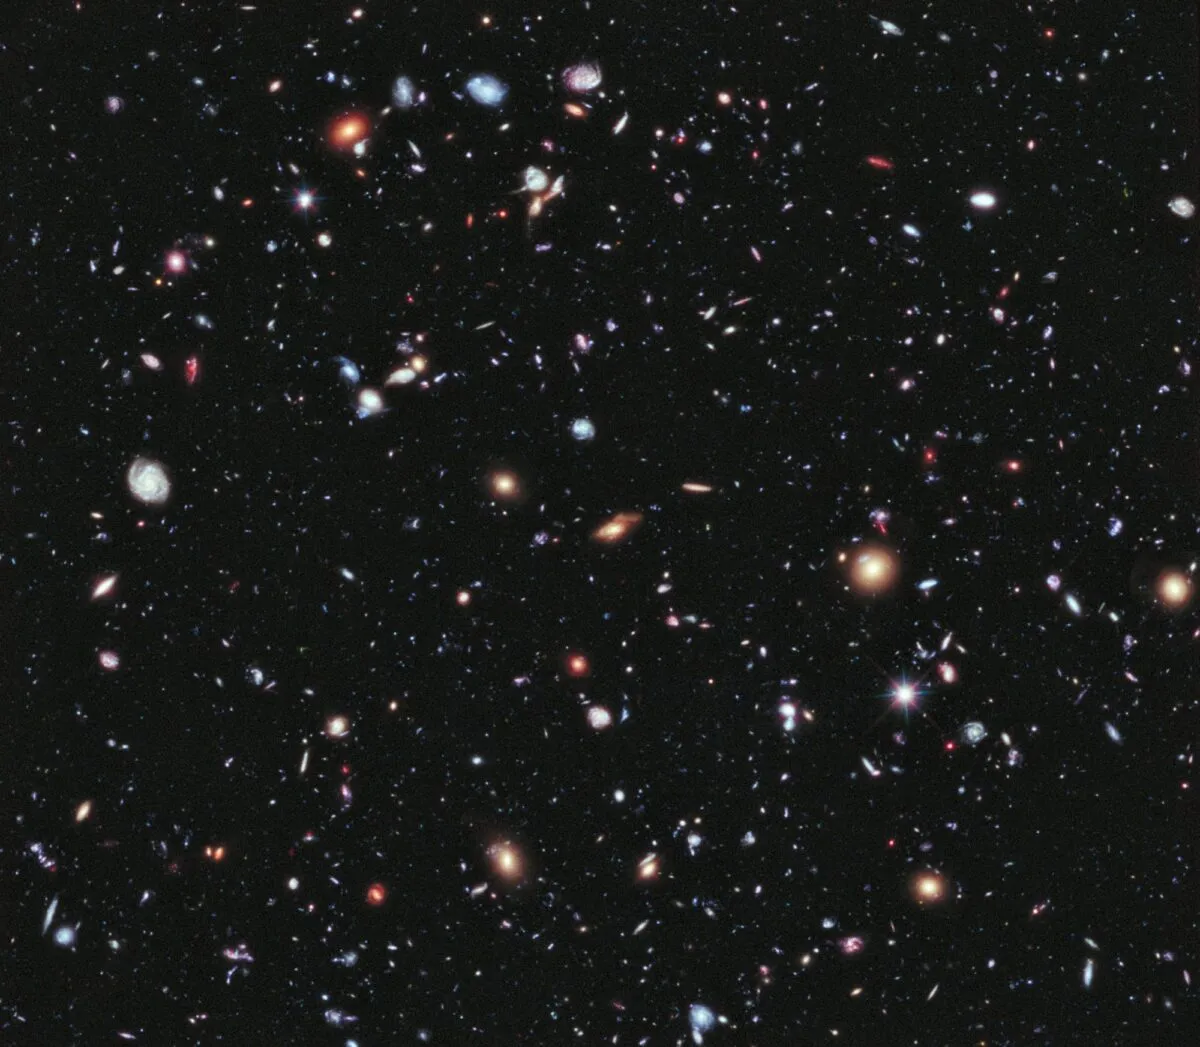 Is the Universe infinite? This is one of the biggest questions about the Universe that we hear most often. NASA; ESA; G. Illingworth, D. Magee, and P. Oesch, University of California, Santa Cruz; R. Bouwens, Leiden University; and the HUDF09 Team